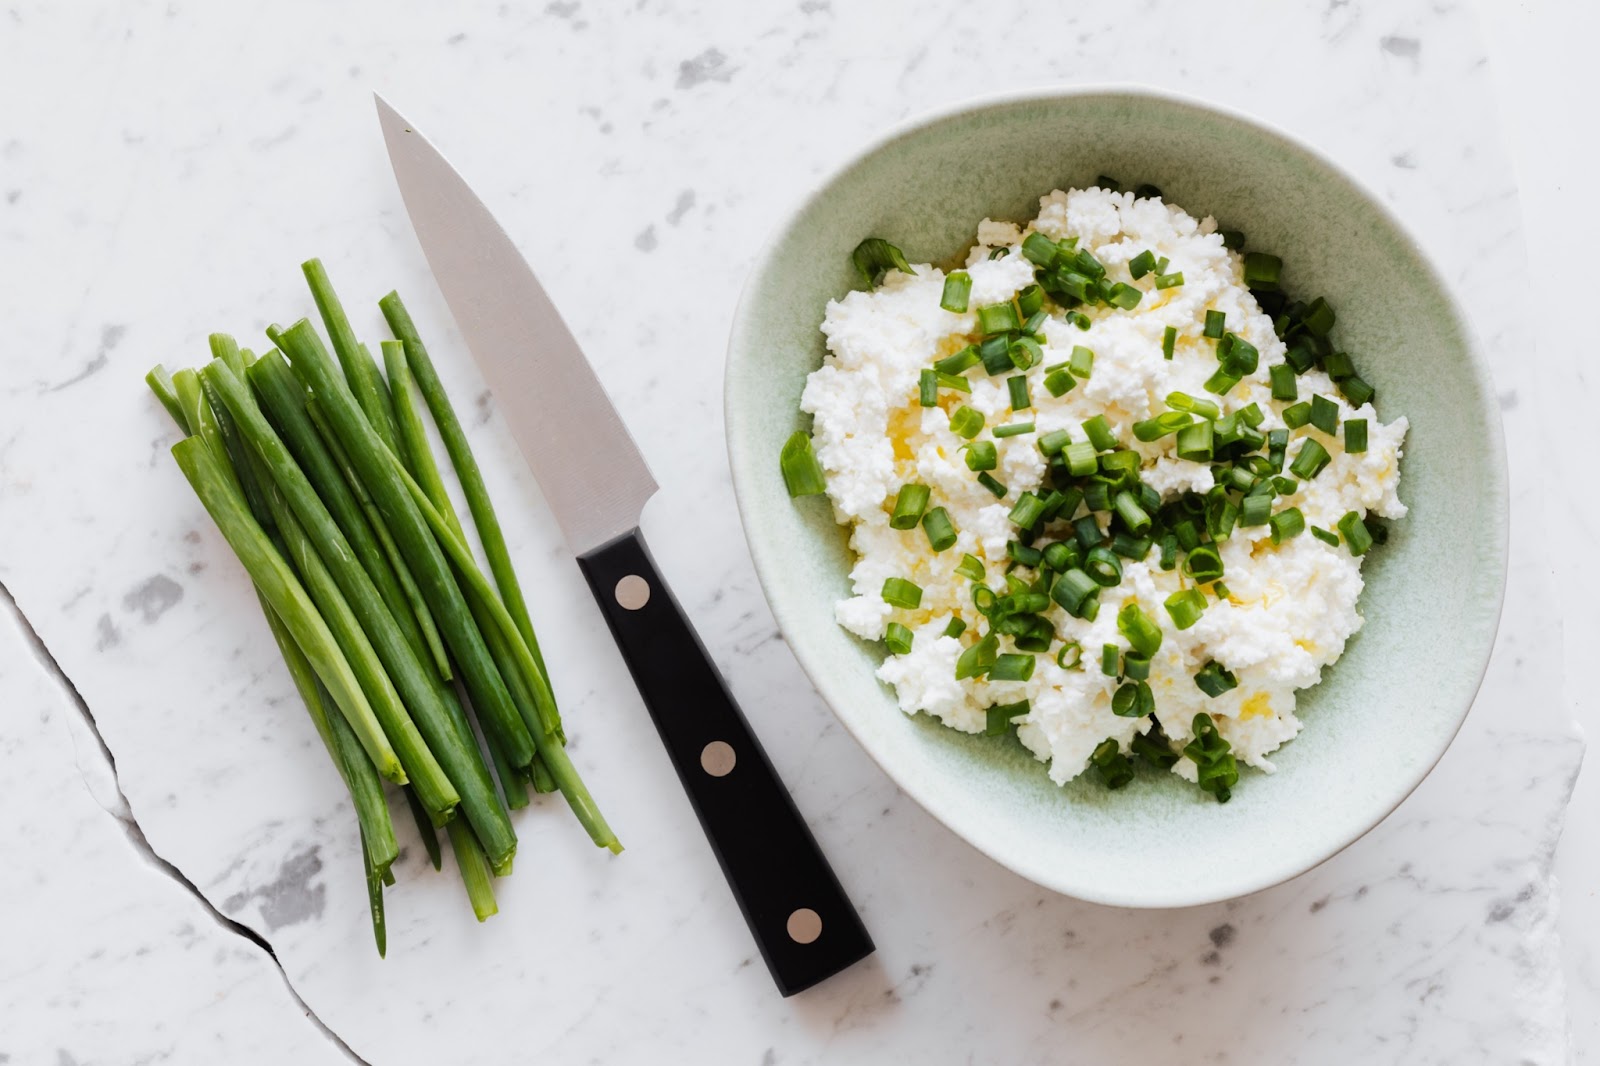 Fresh chives and a knife are pictured on a counter next to a bowl filled with cottage cheese topped with chopped fresh chives